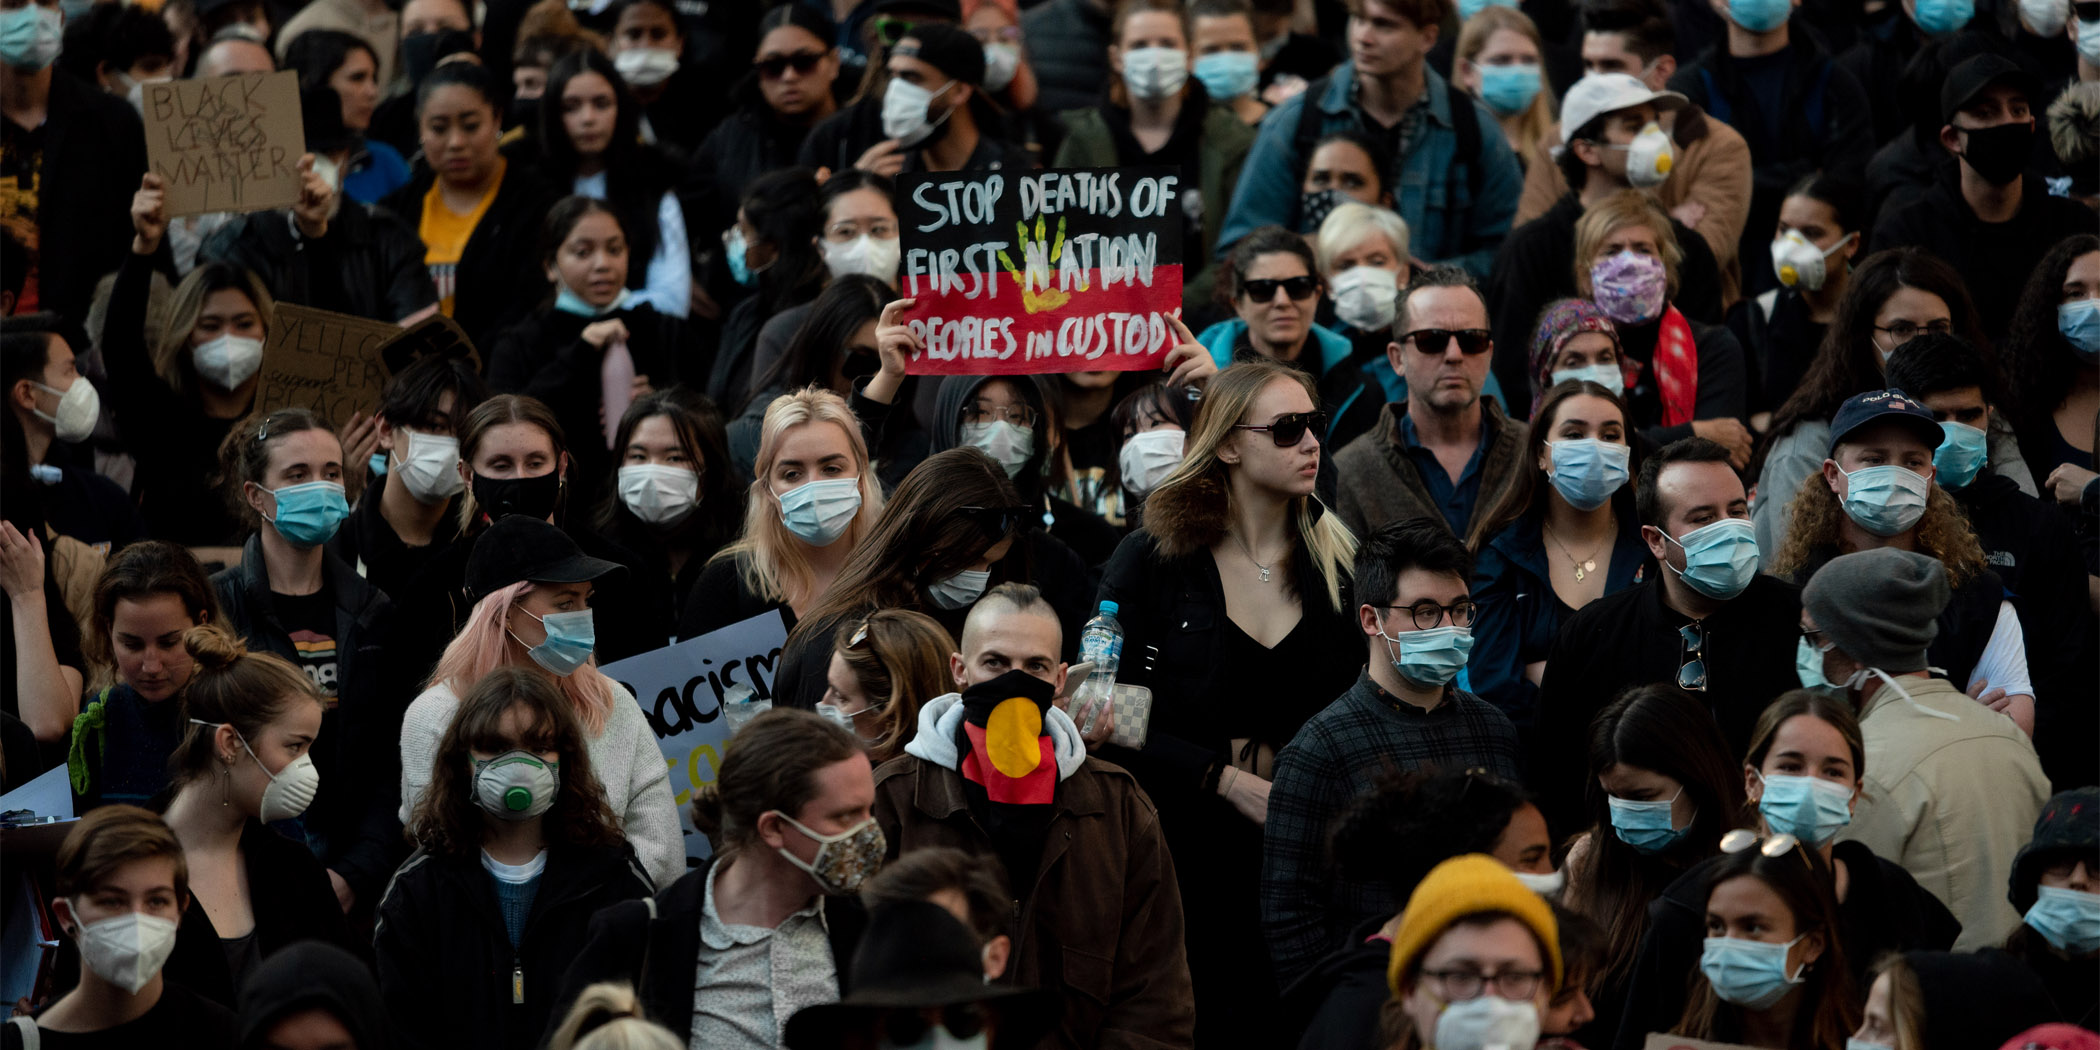 Protesters at the Black Lives Matter rally on Gadigal land (Sydney) last June observed COVID-19 protocols and wore masks.